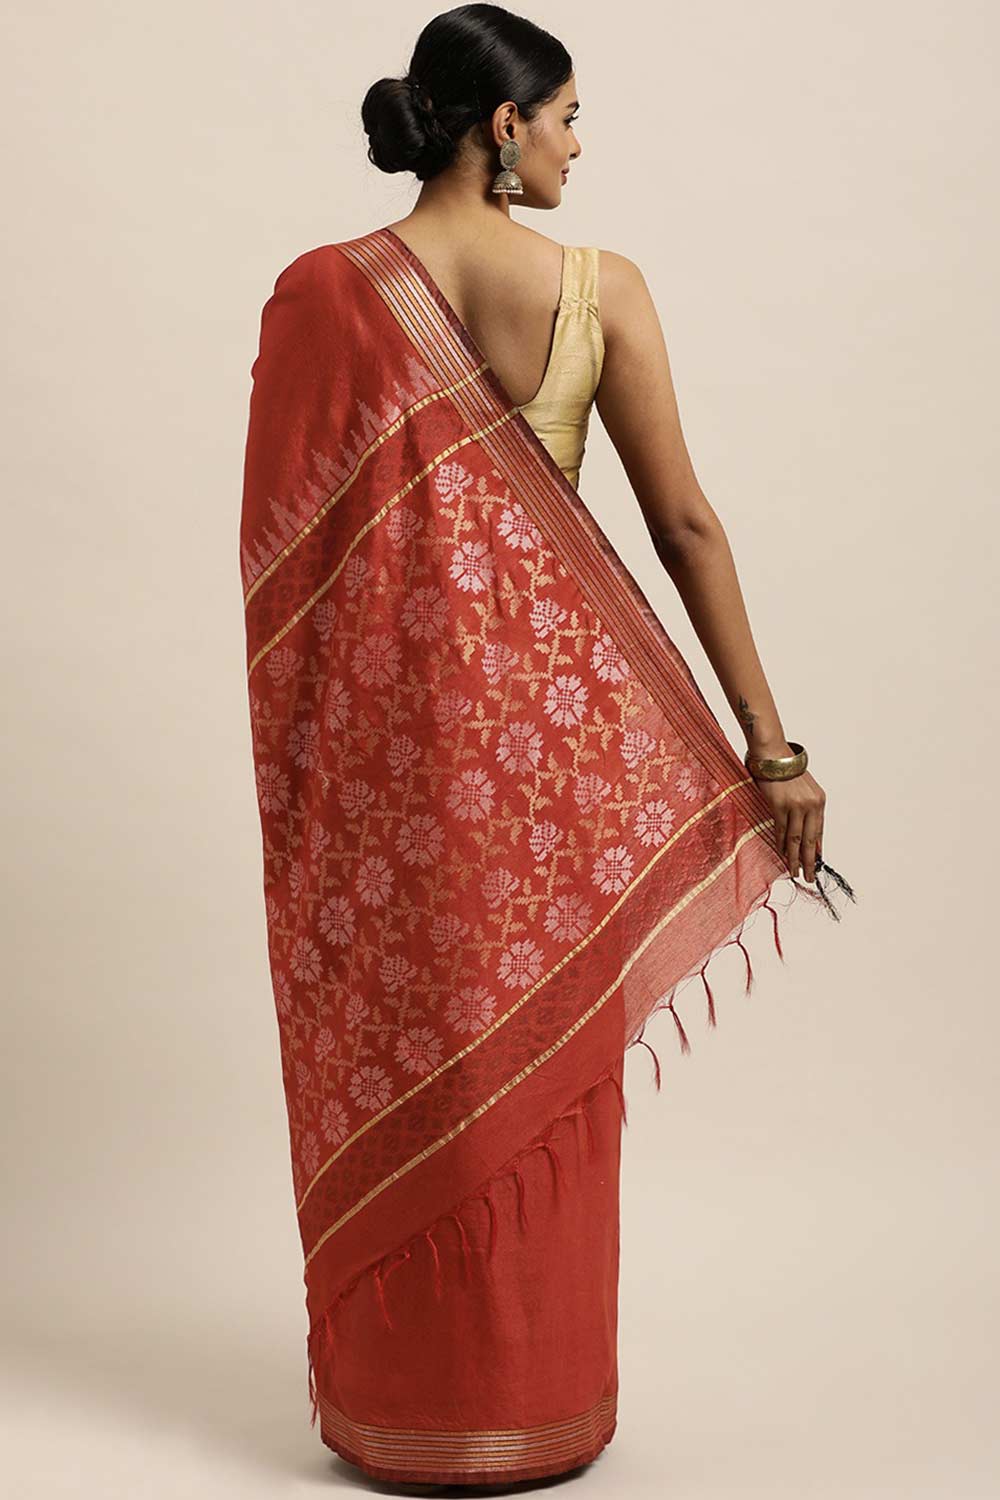 Shop Sheena Red Zari Woven Blended Silk One Minute Saree at best offer at our  Store - One Minute Saree